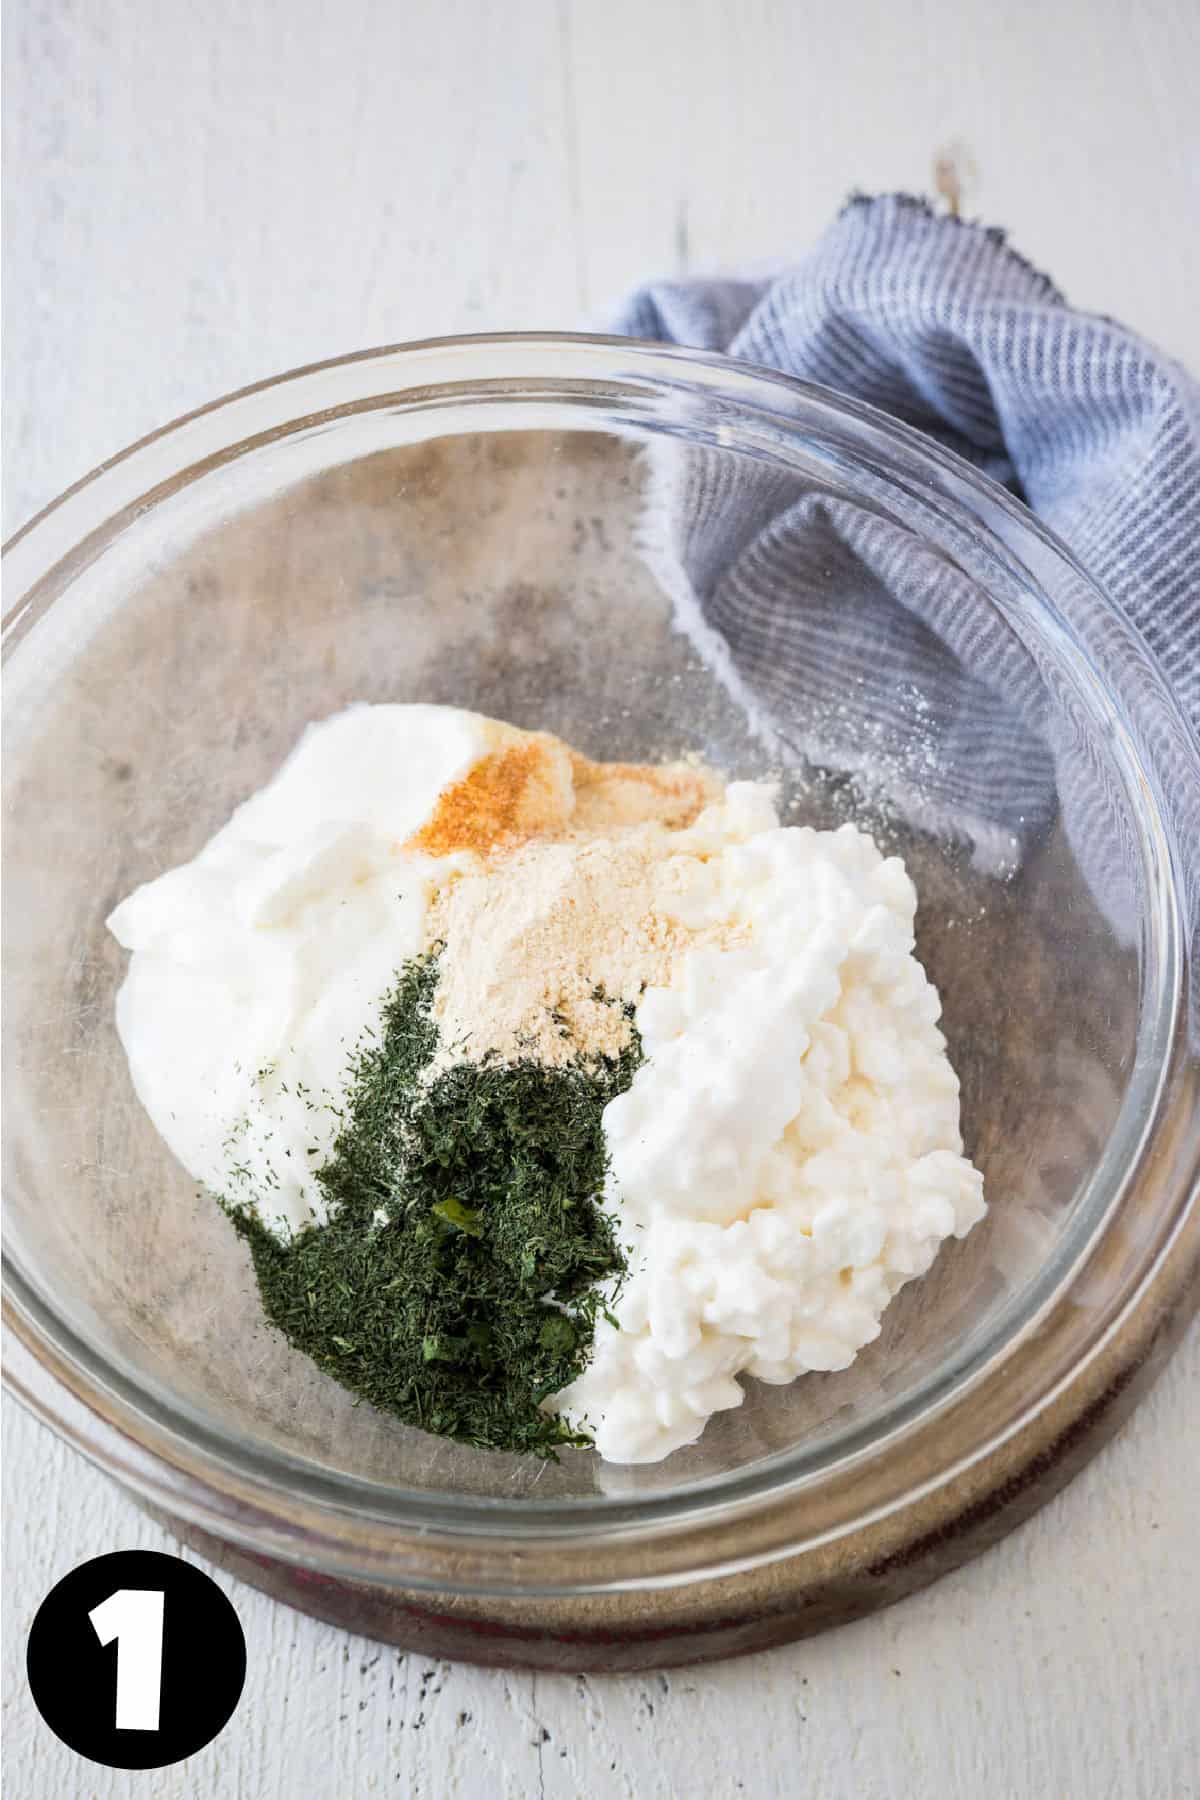 Cottage cheese, yogurt, and seasonings in a bowl to make dill dip.